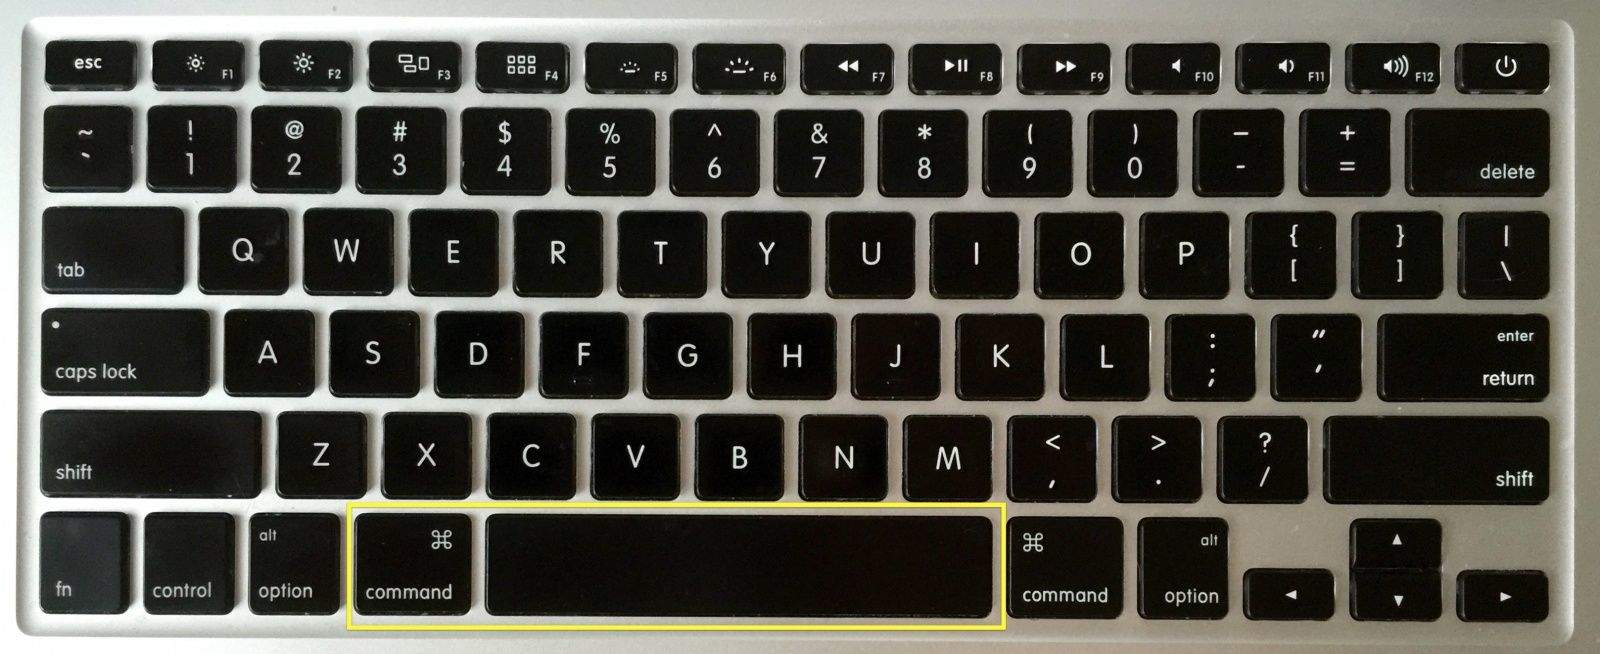 how to use control key on mac for ctrl